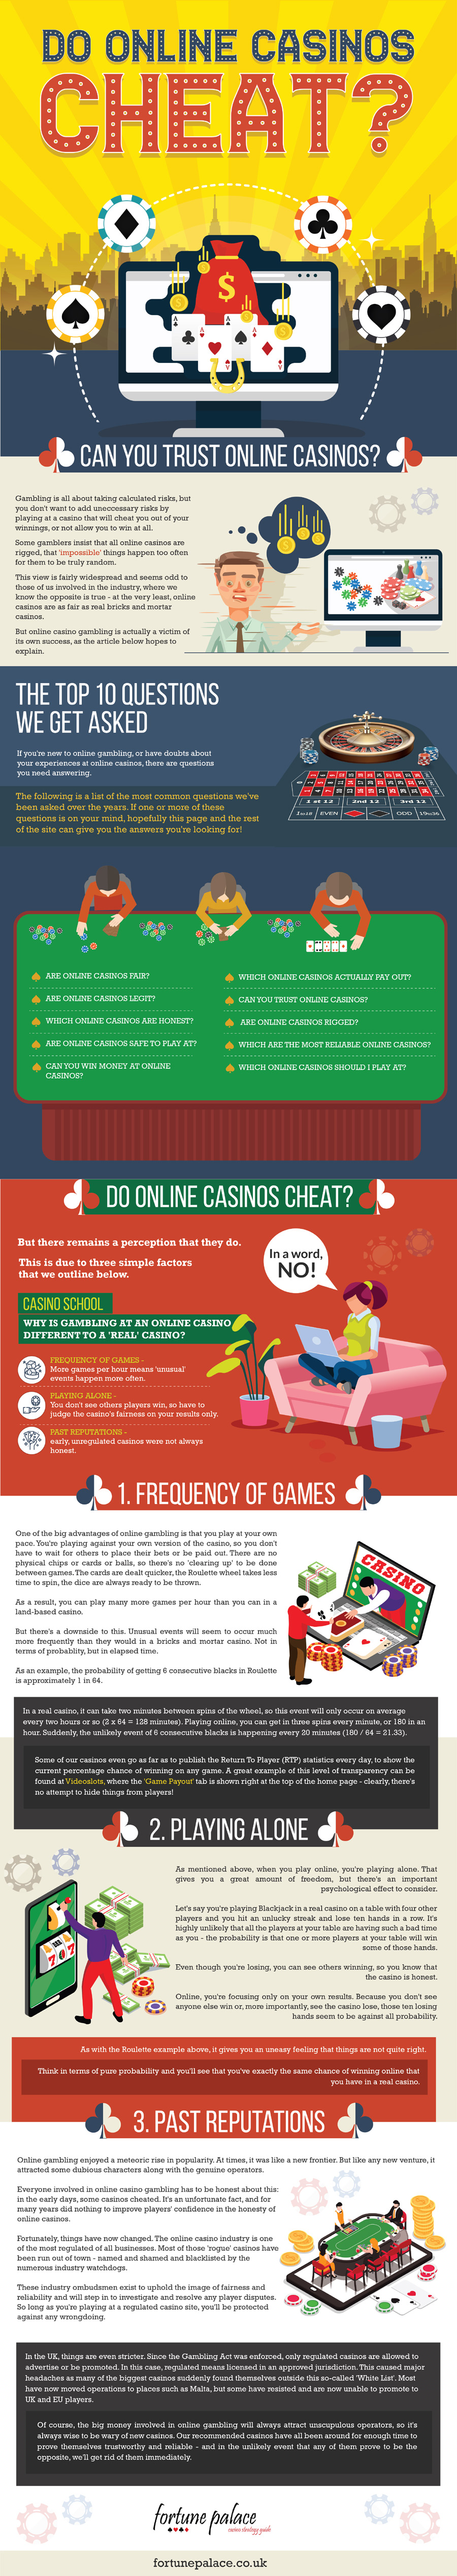 Can you trust online casinos?